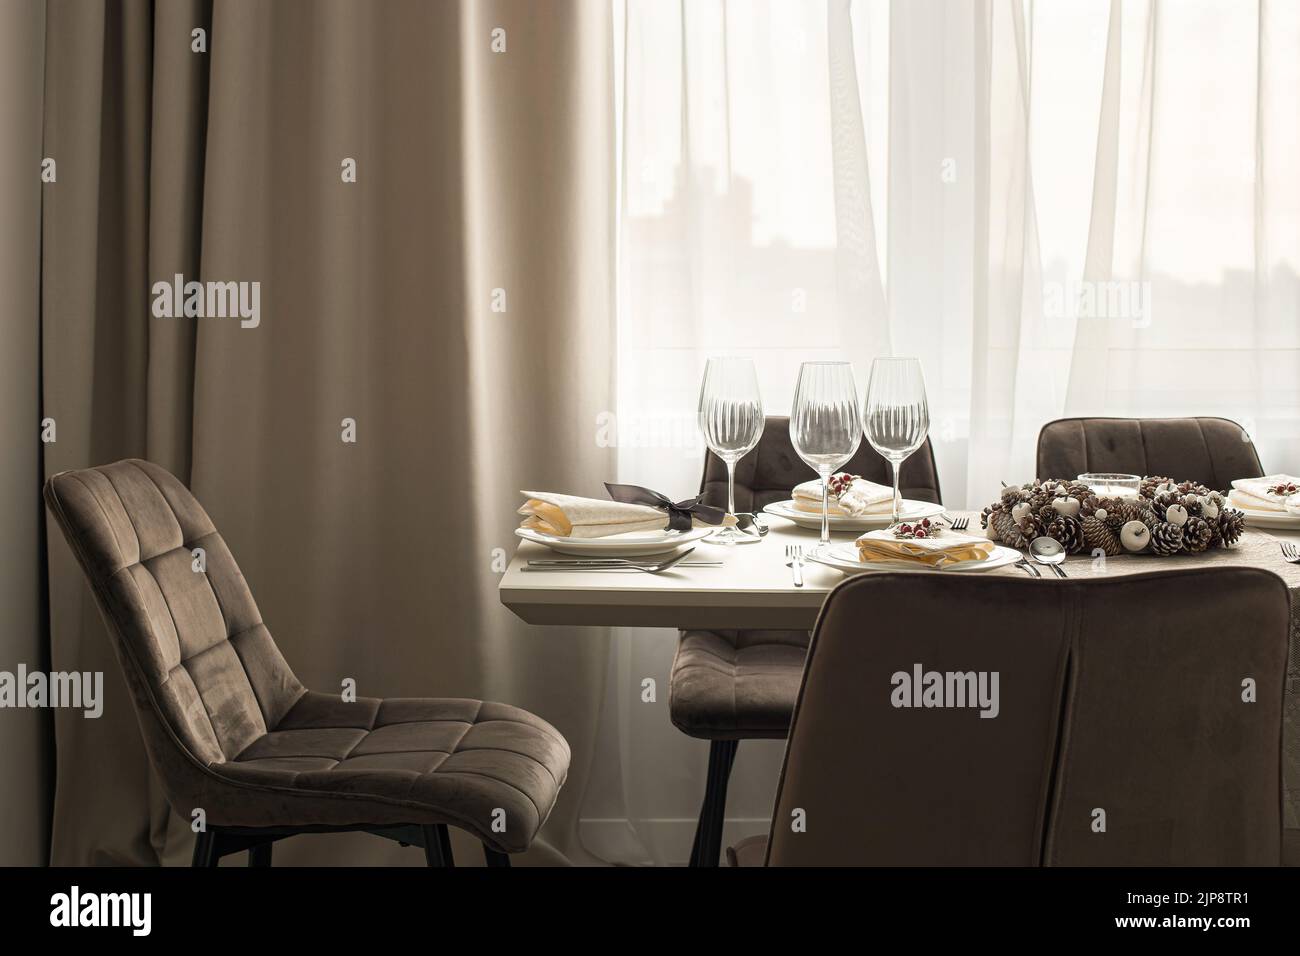 Served table in modern dining room. Interior design details close-up. Stock Photo